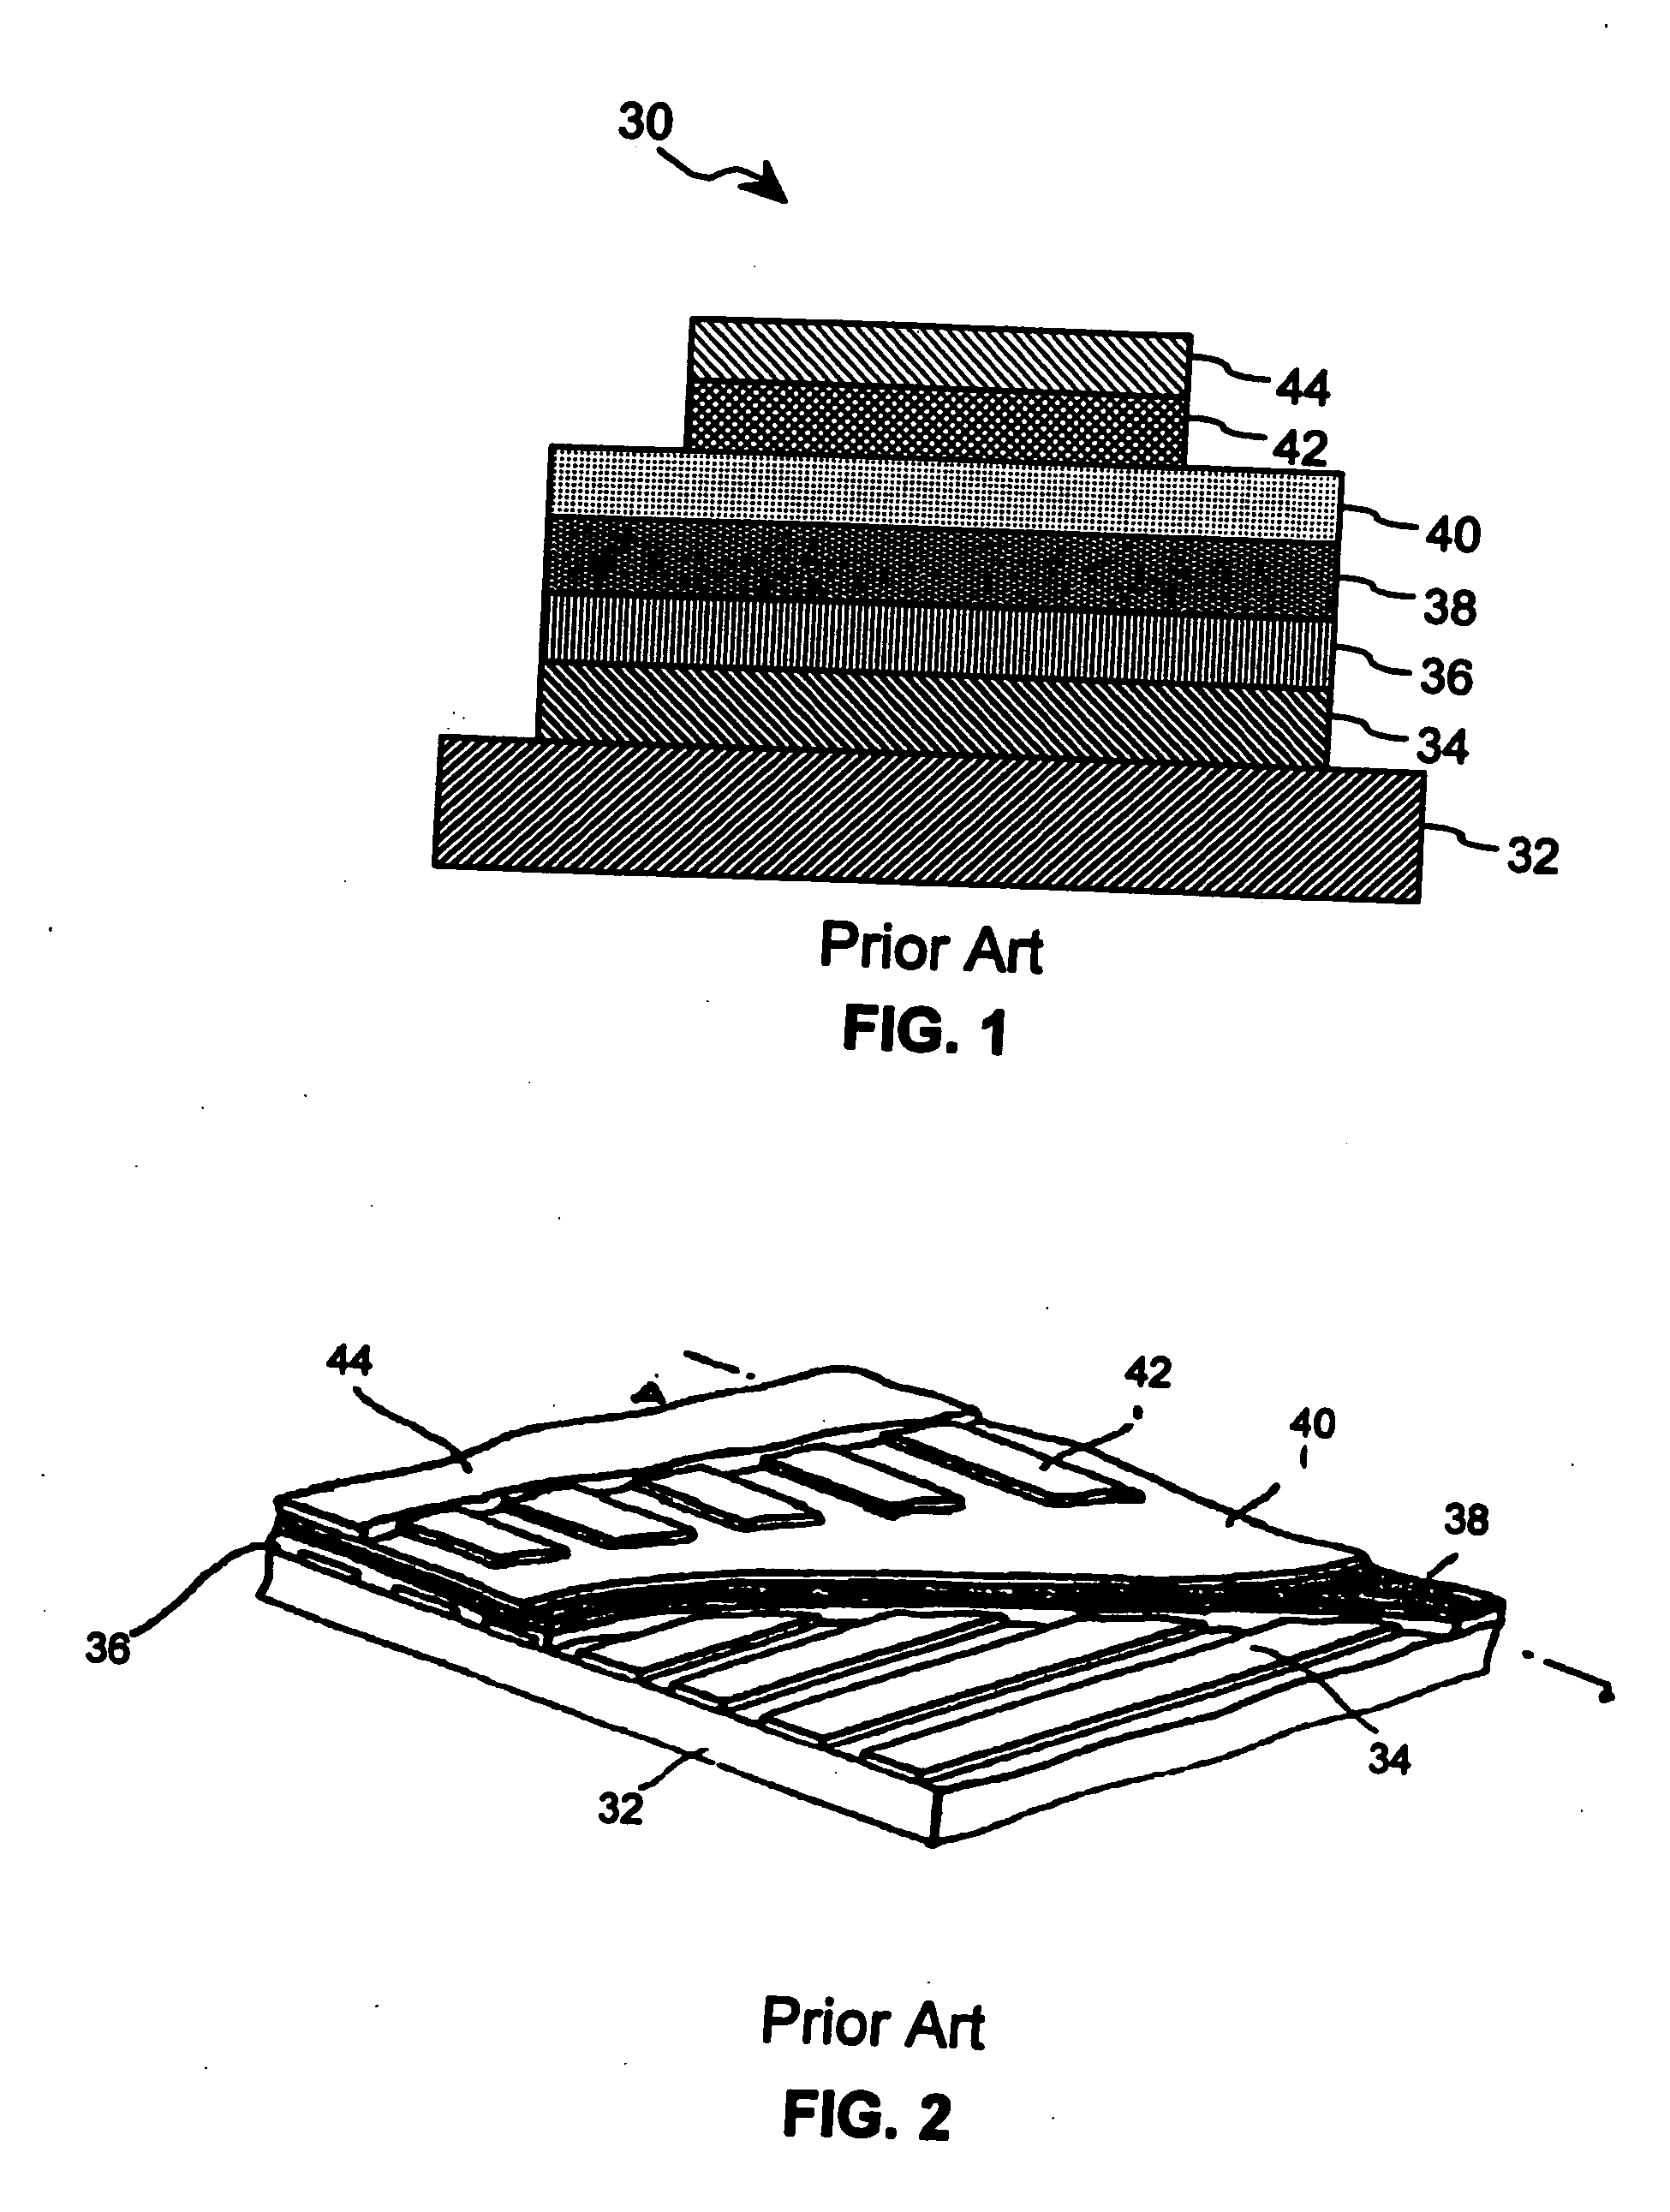 Deposition of permanent polymer structures for OLED fabrication